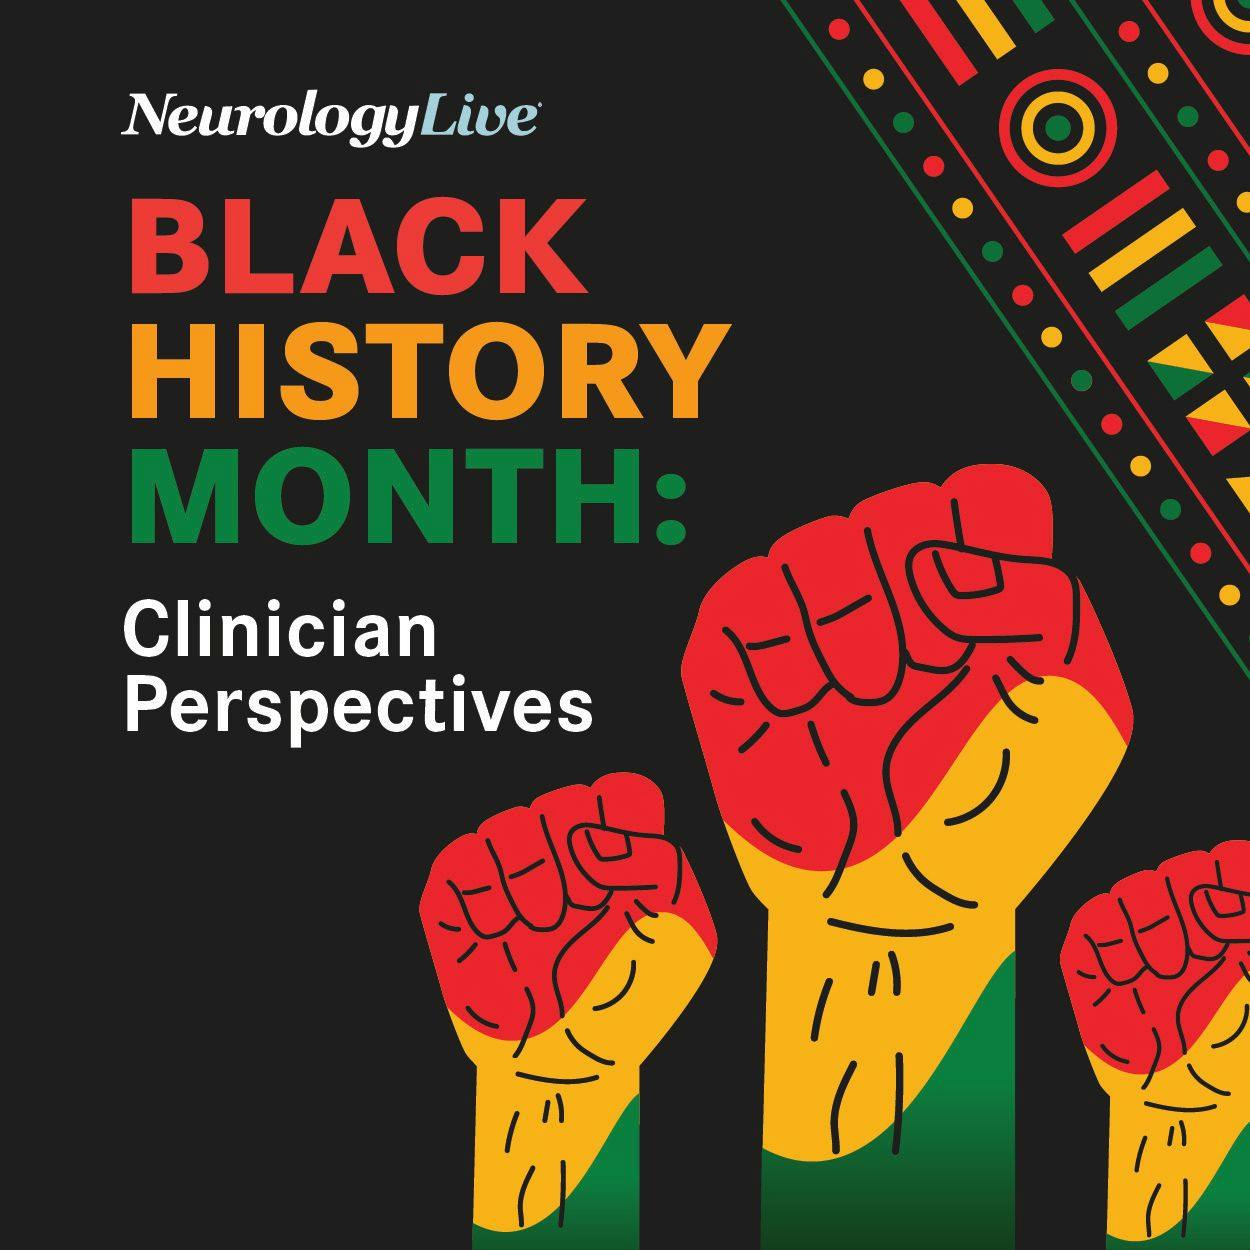 Clinician Perspectives on Black History Month: Adys Mendizabal, MD